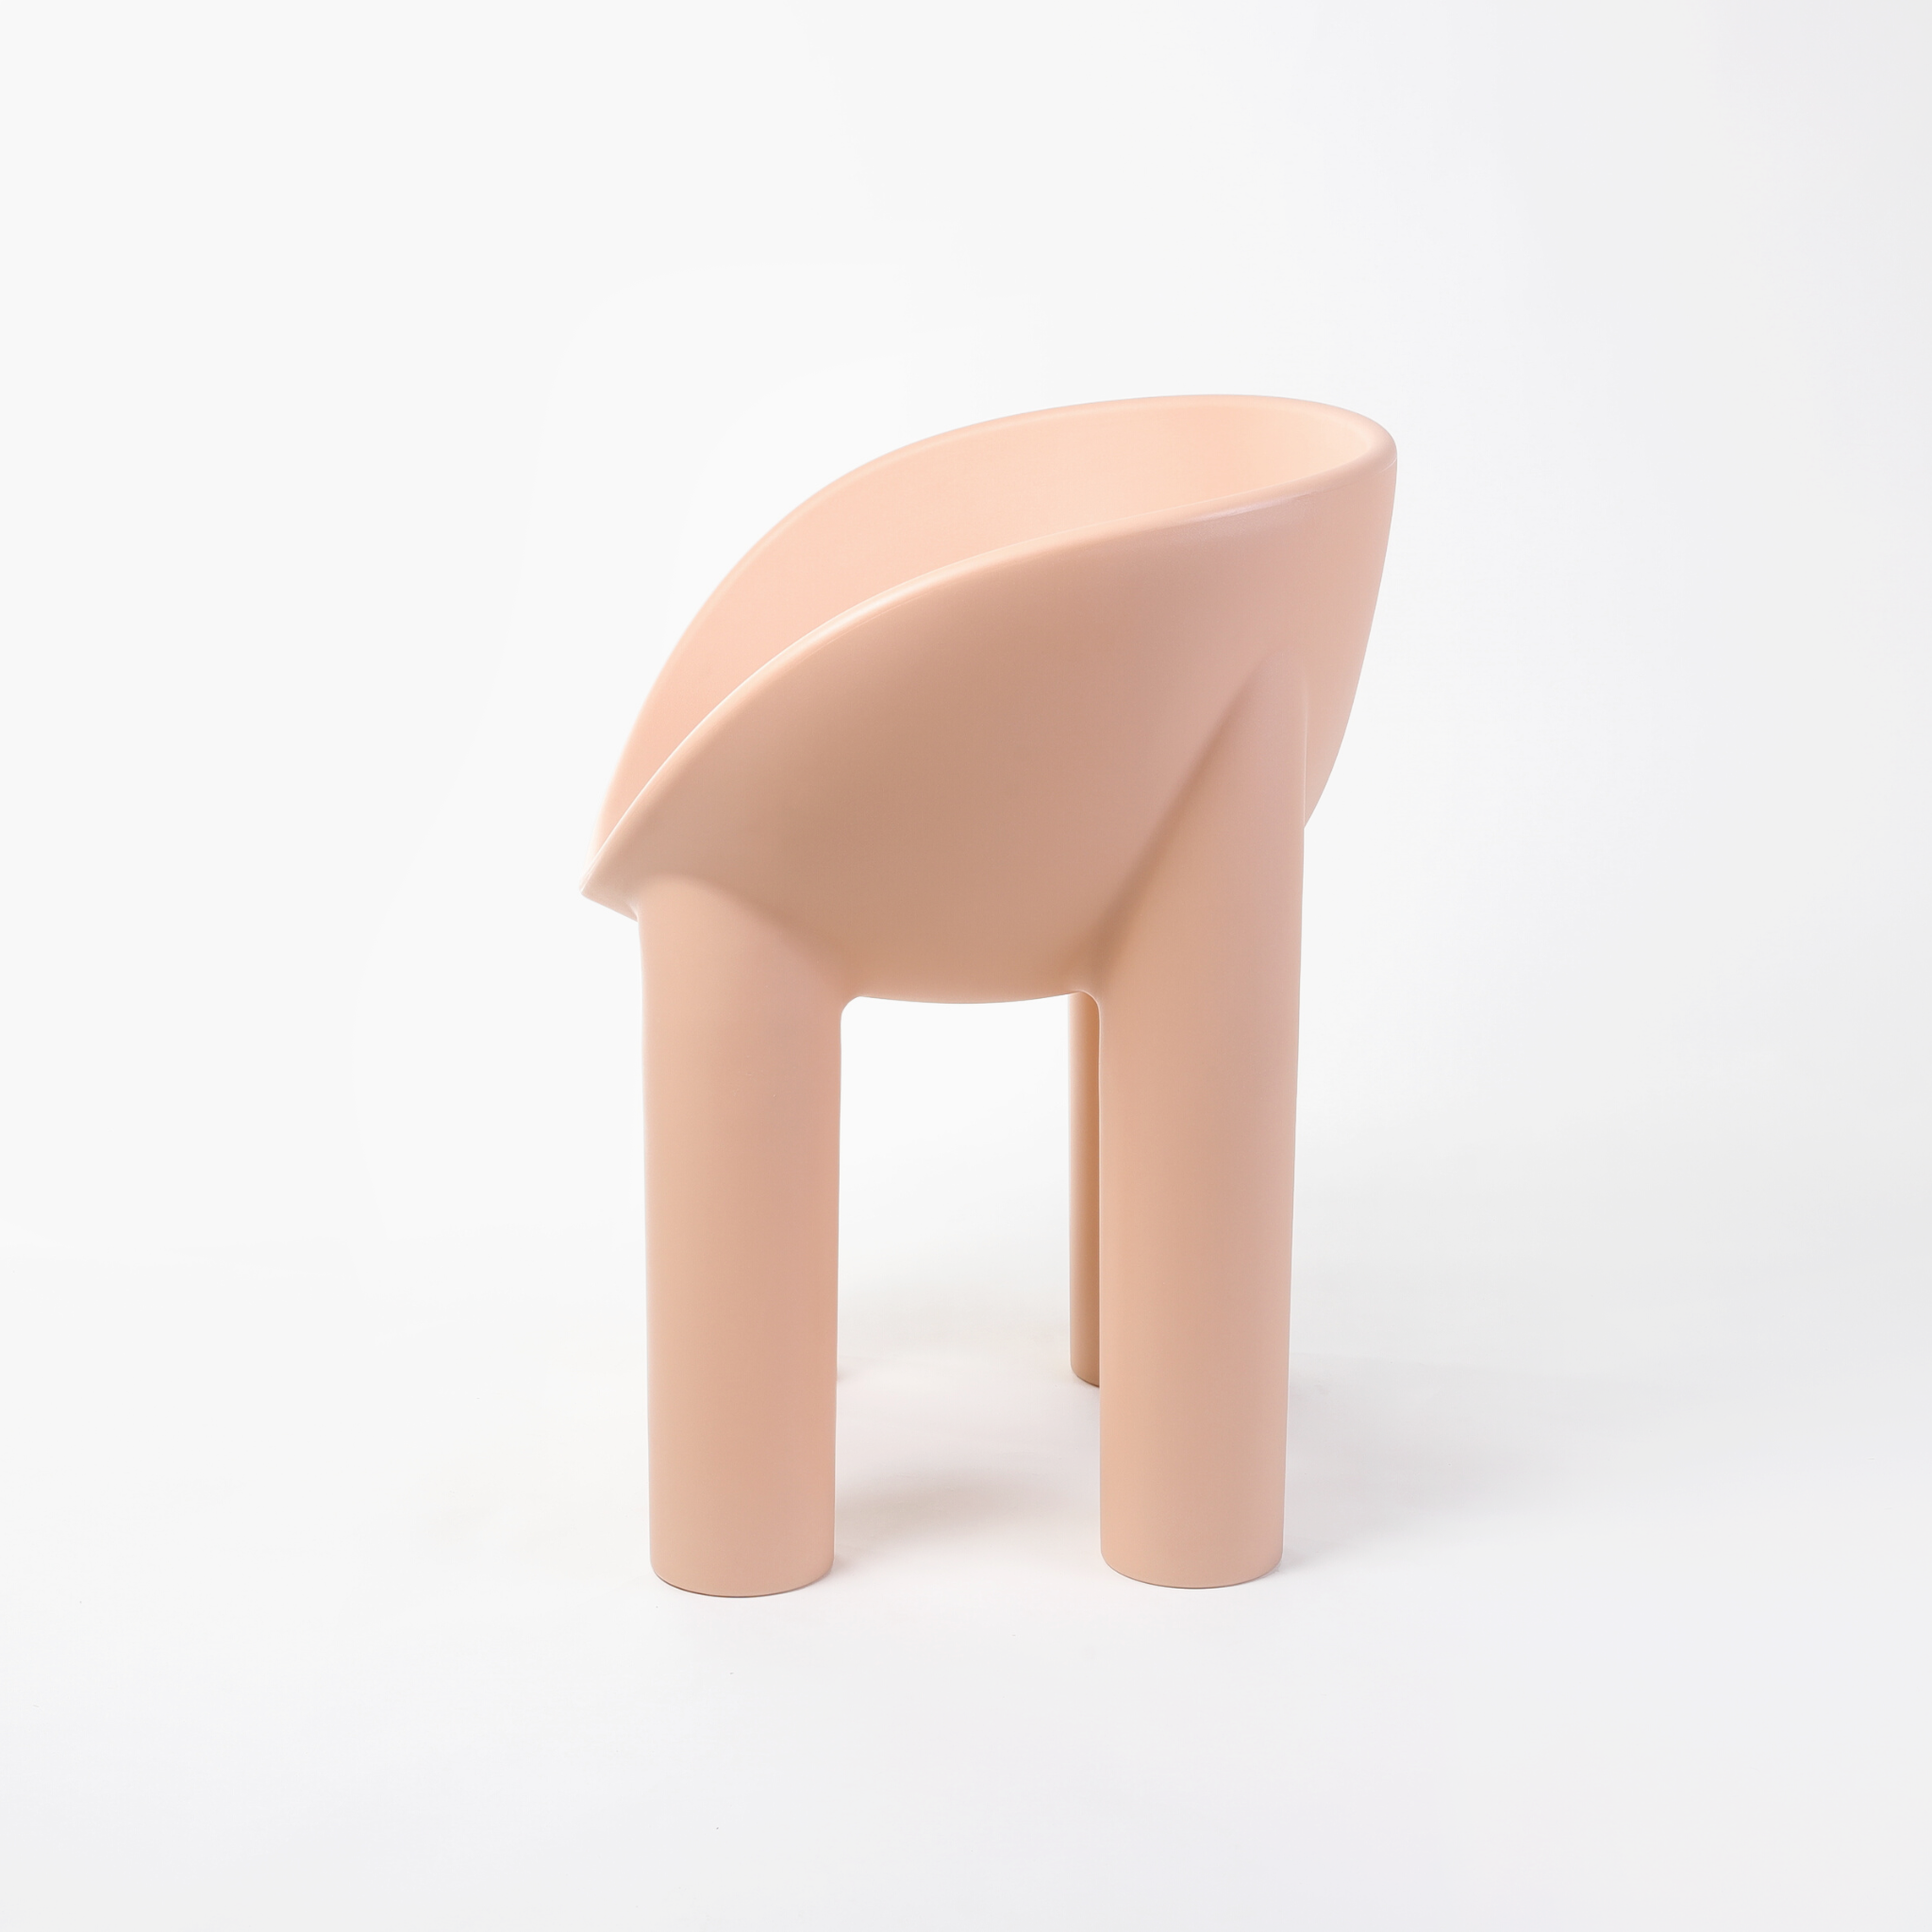 Roly poly dining chair replica